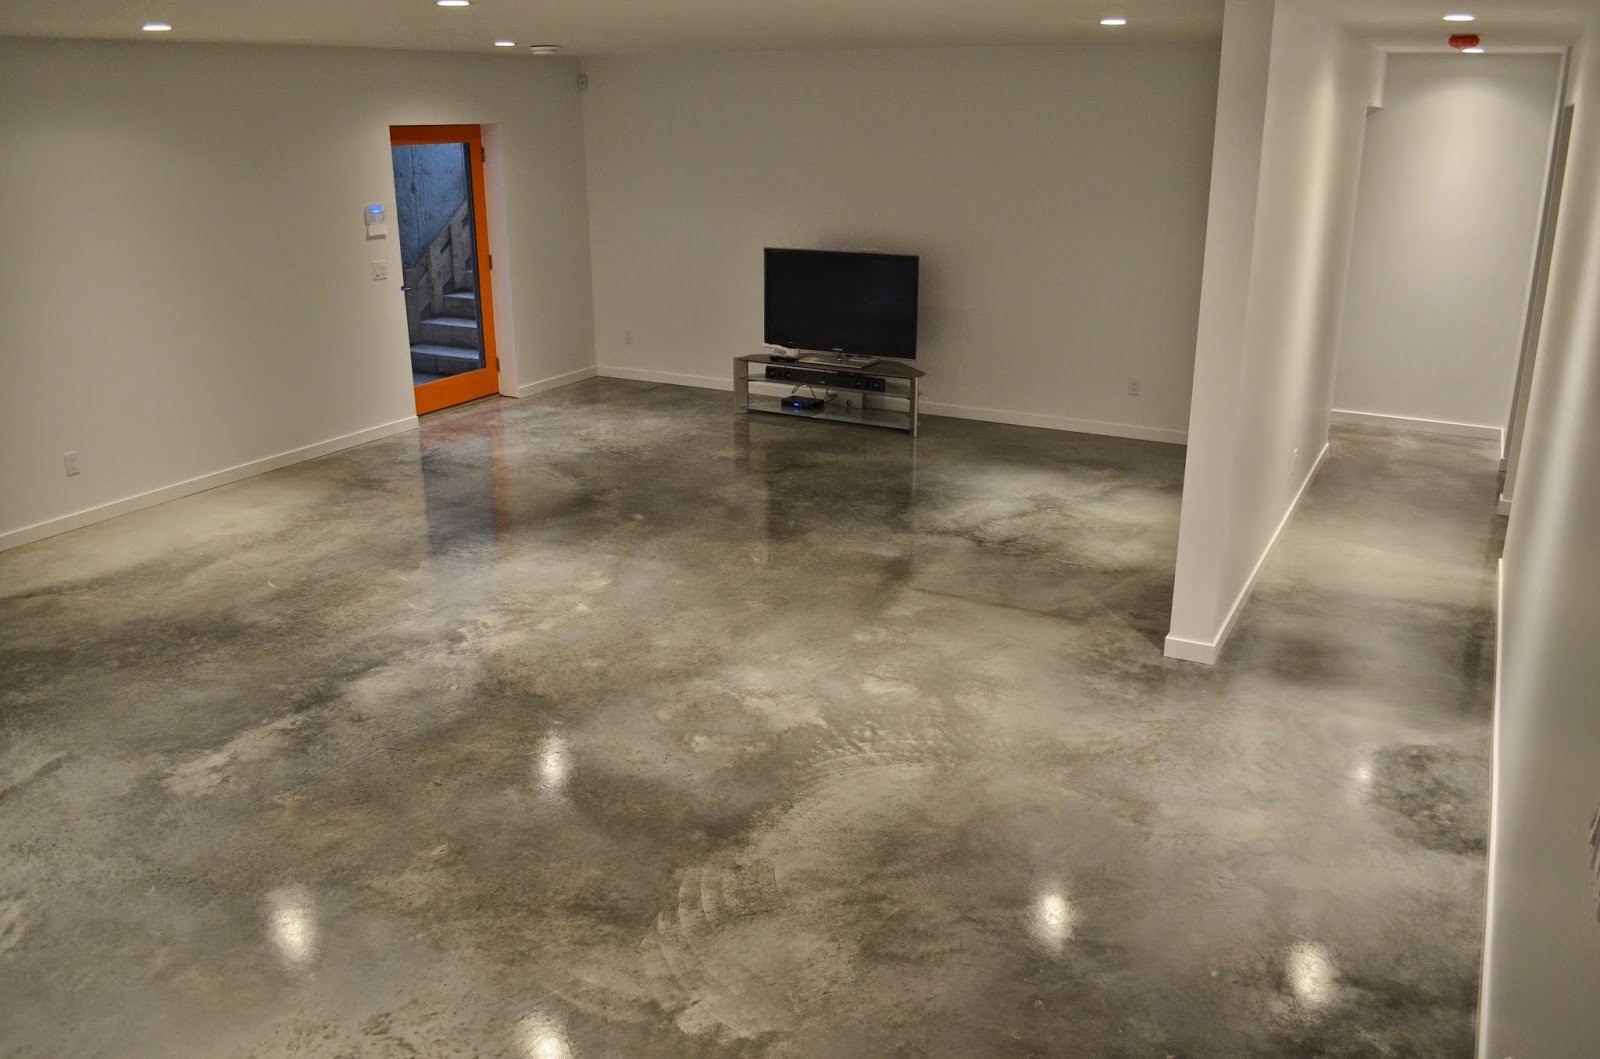 MODE CONCRETE: Cool and Modern Concrete Floors - by MODE CONCRETE